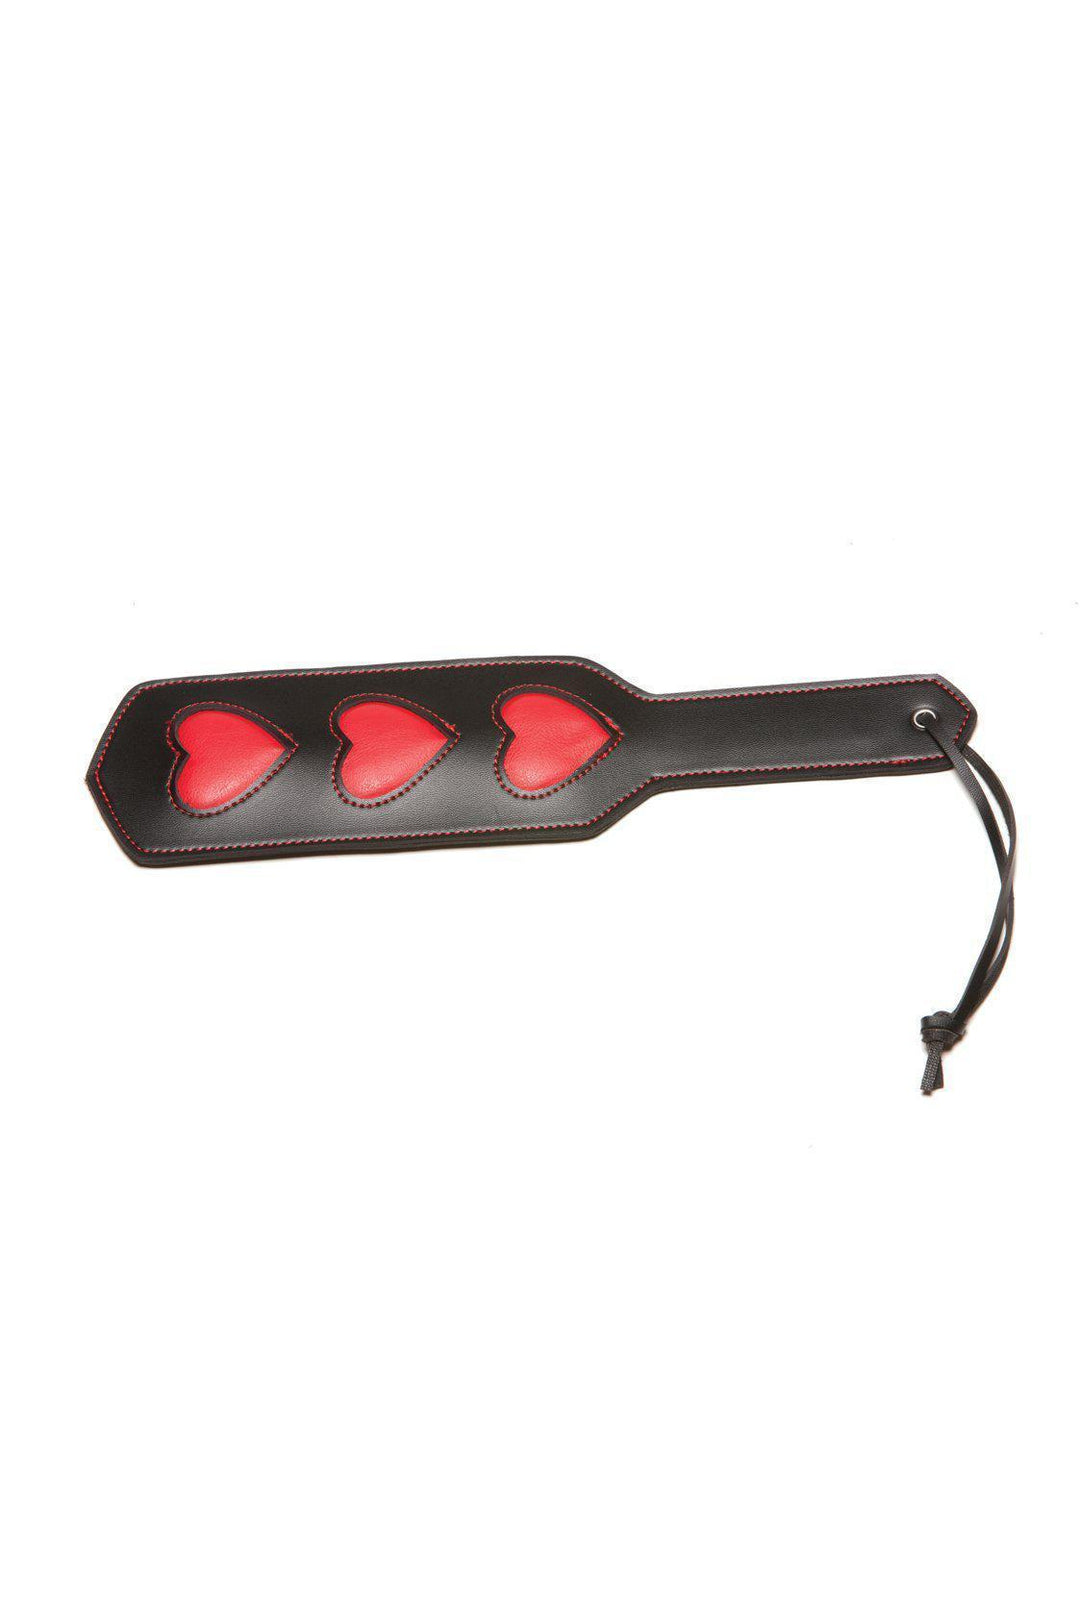 Heart Impression Paddle-X-Play-SEXYSHOES.COM